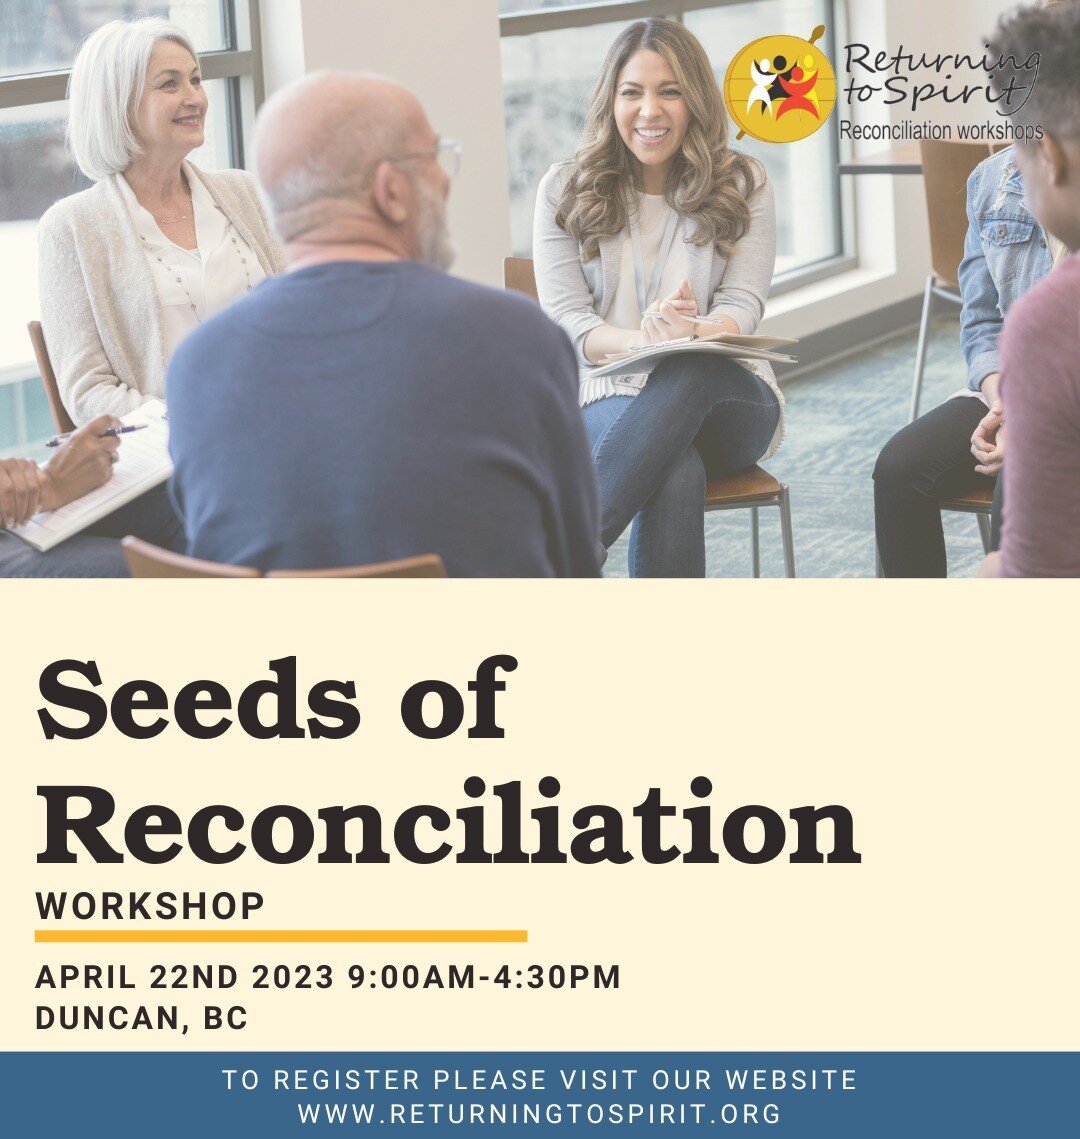 Duncan, BC, we'll be back soon! April 22nd, we'll be delivering a Seeds of Reconciliation workshop and there are still spots available to register. Don't miss out! 

Link in bio for more info/to register. 

.
.
.
.

#duncan #duncanbc #bc #britishcolu